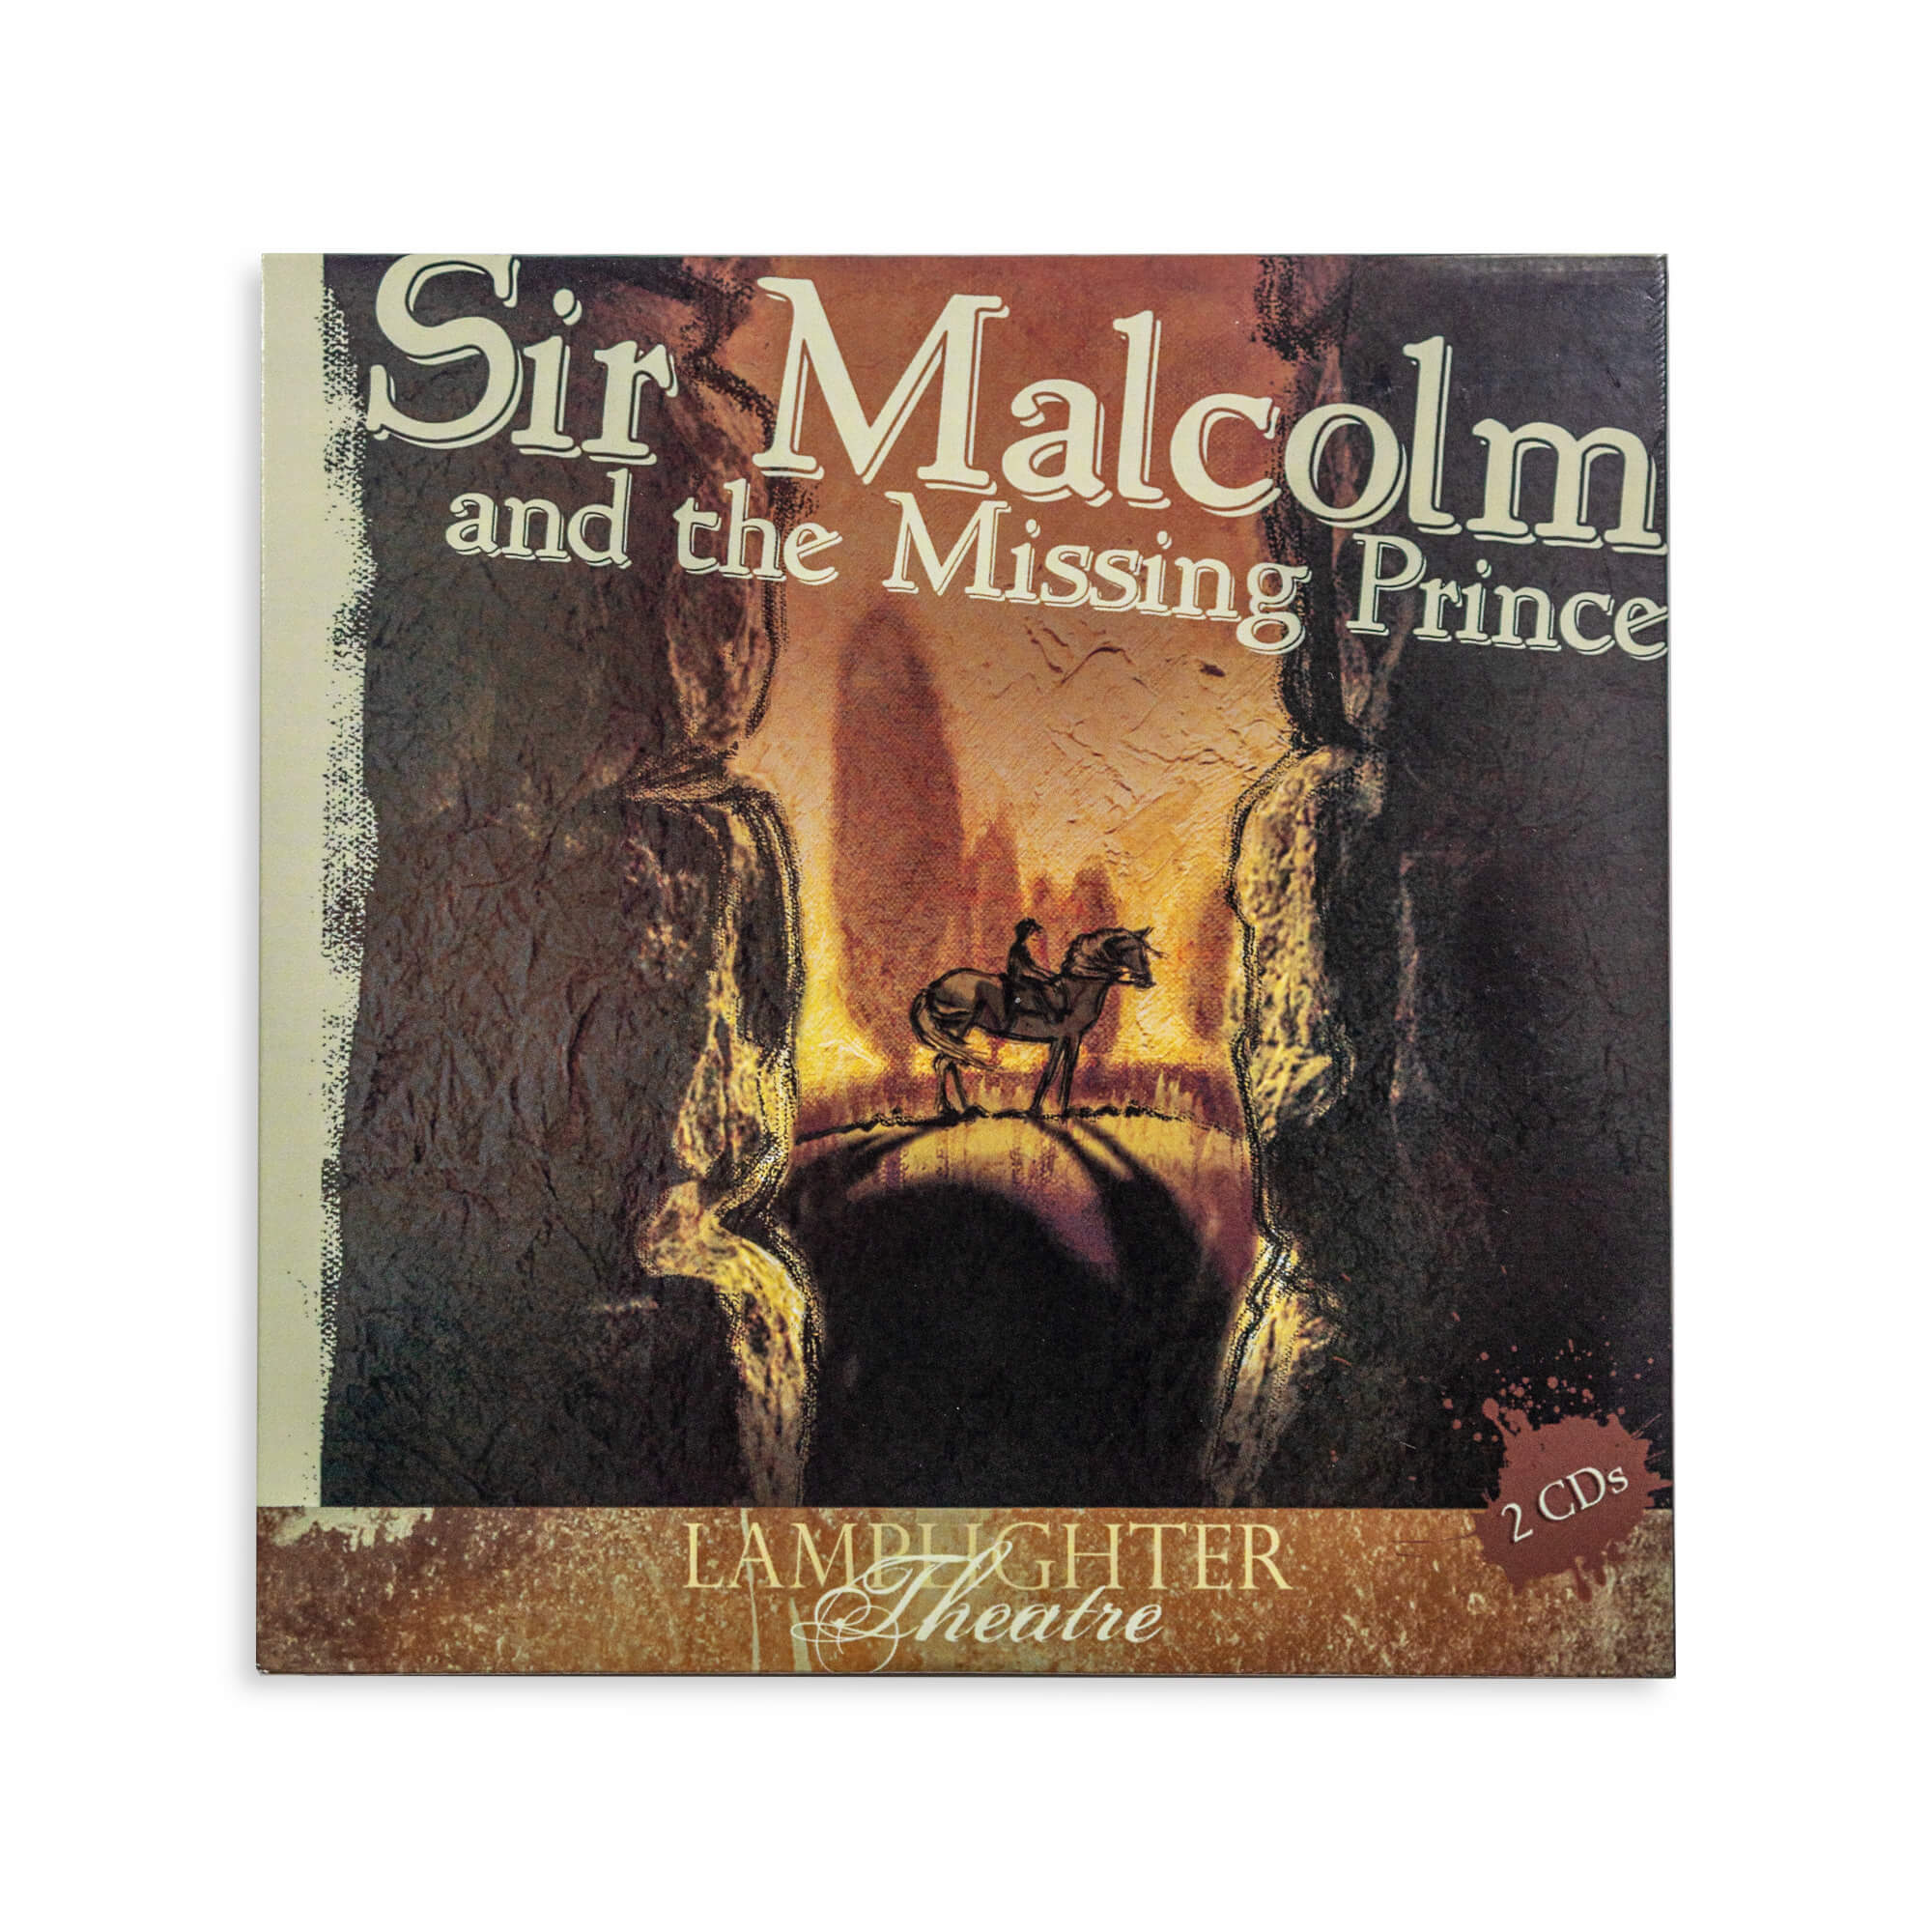 Sir Malcolm and the Missing Prince Audio drama CD